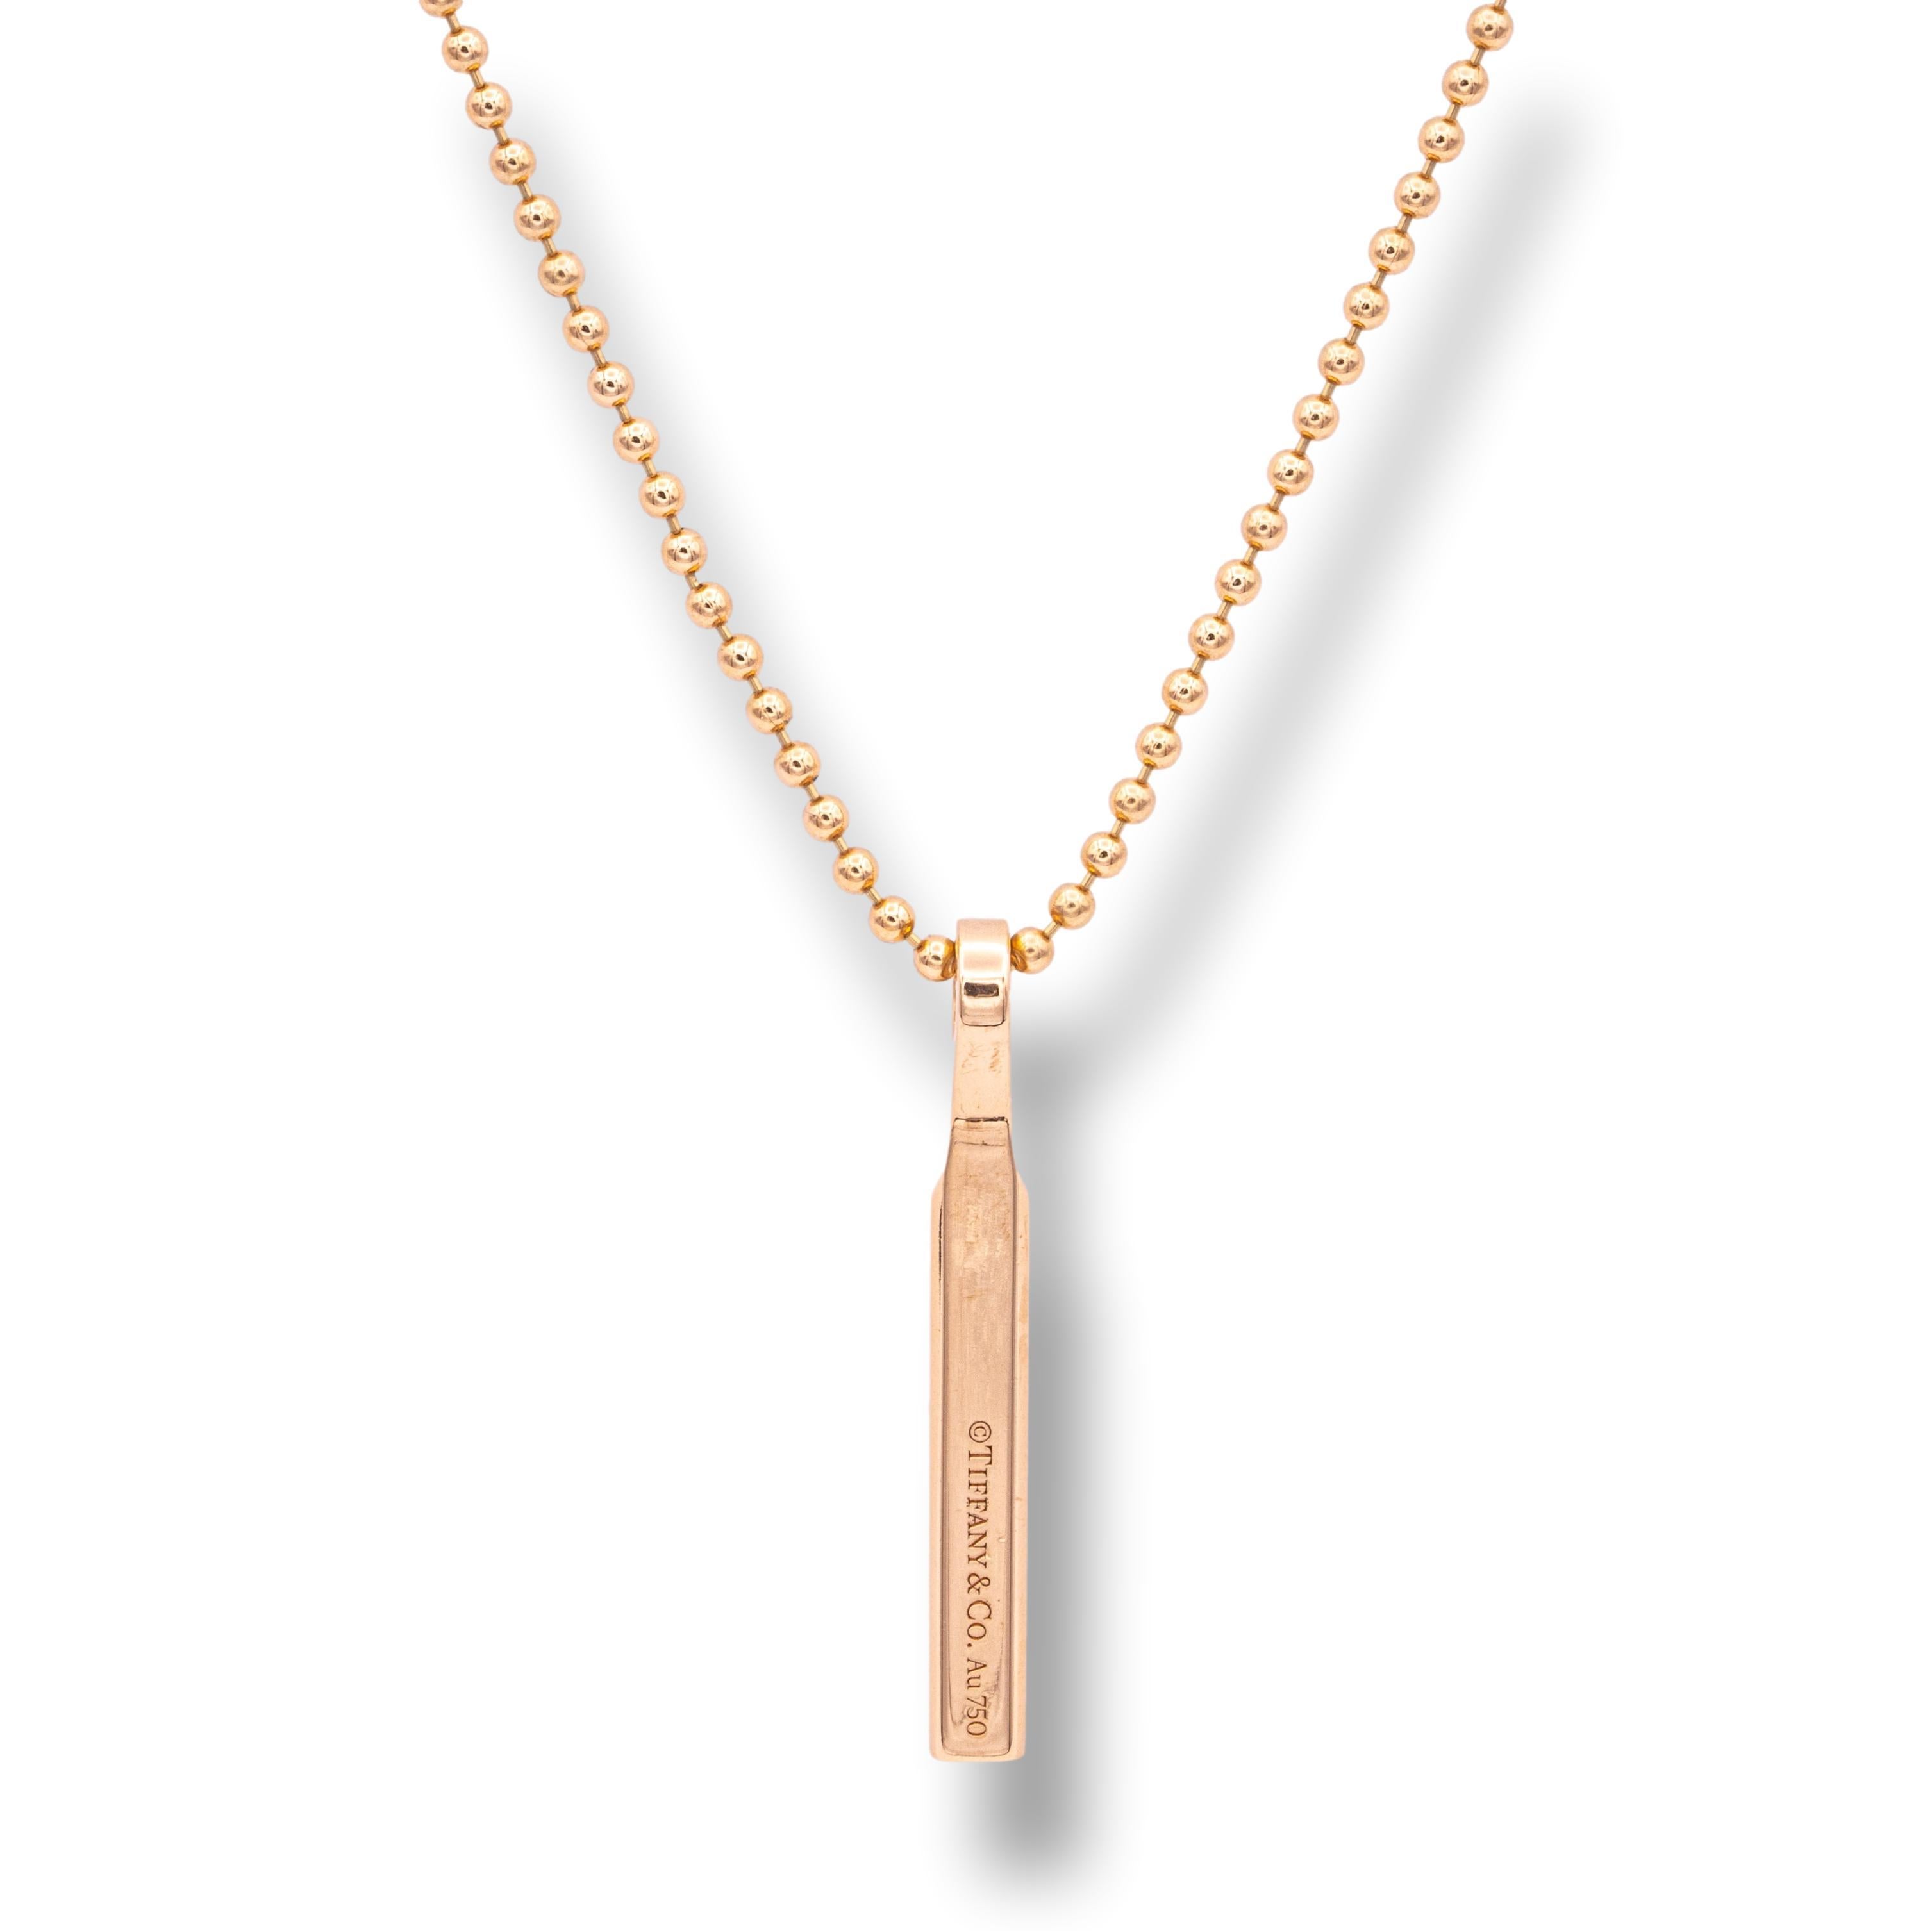 Tiffany & Co. Bar 1837 Makers Bar Pendant Necklace finely crafted in 18 karat rose gold with a 24